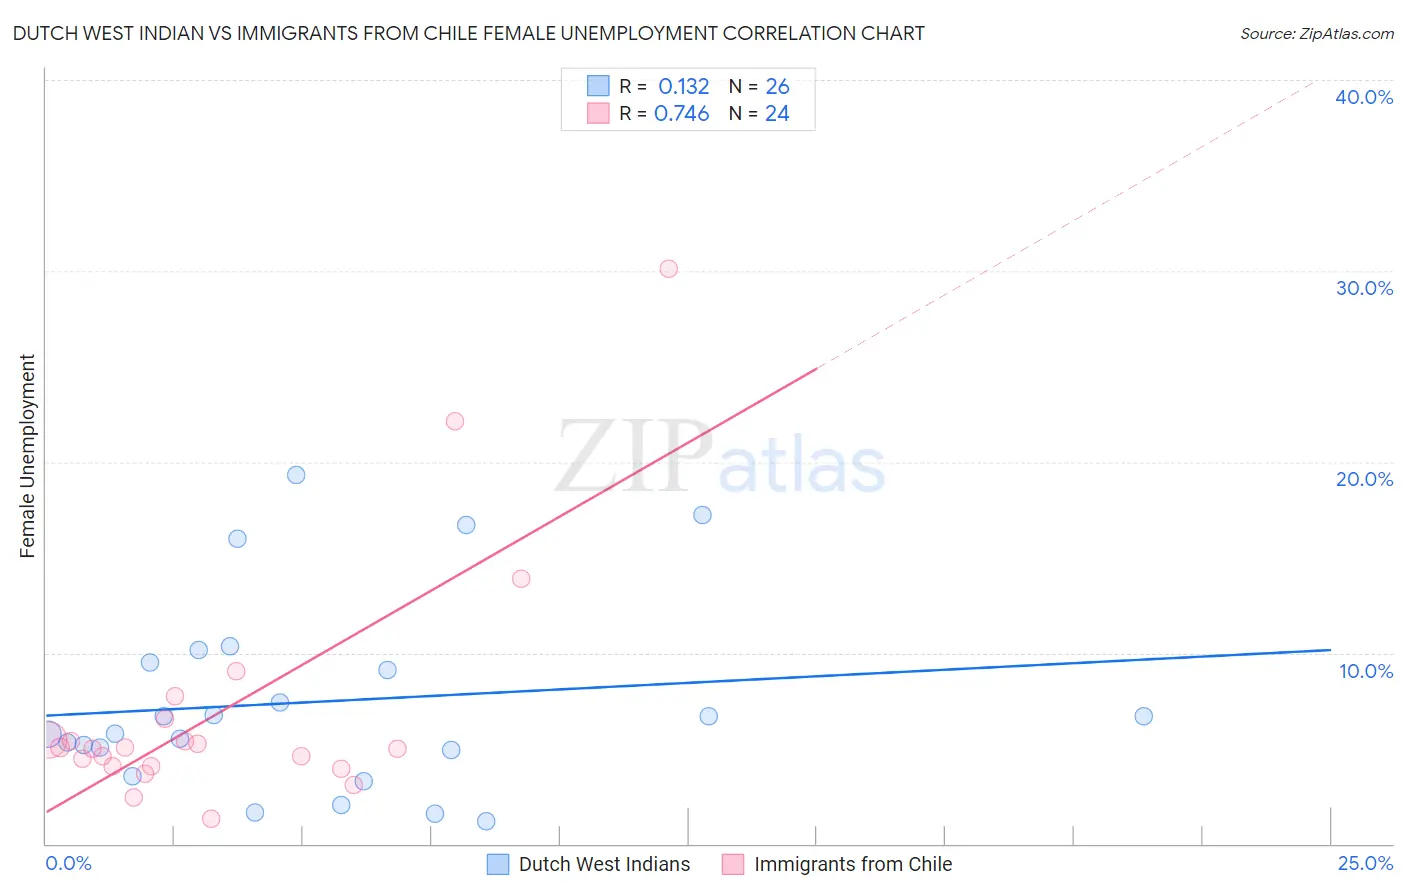 Dutch West Indian vs Immigrants from Chile Female Unemployment